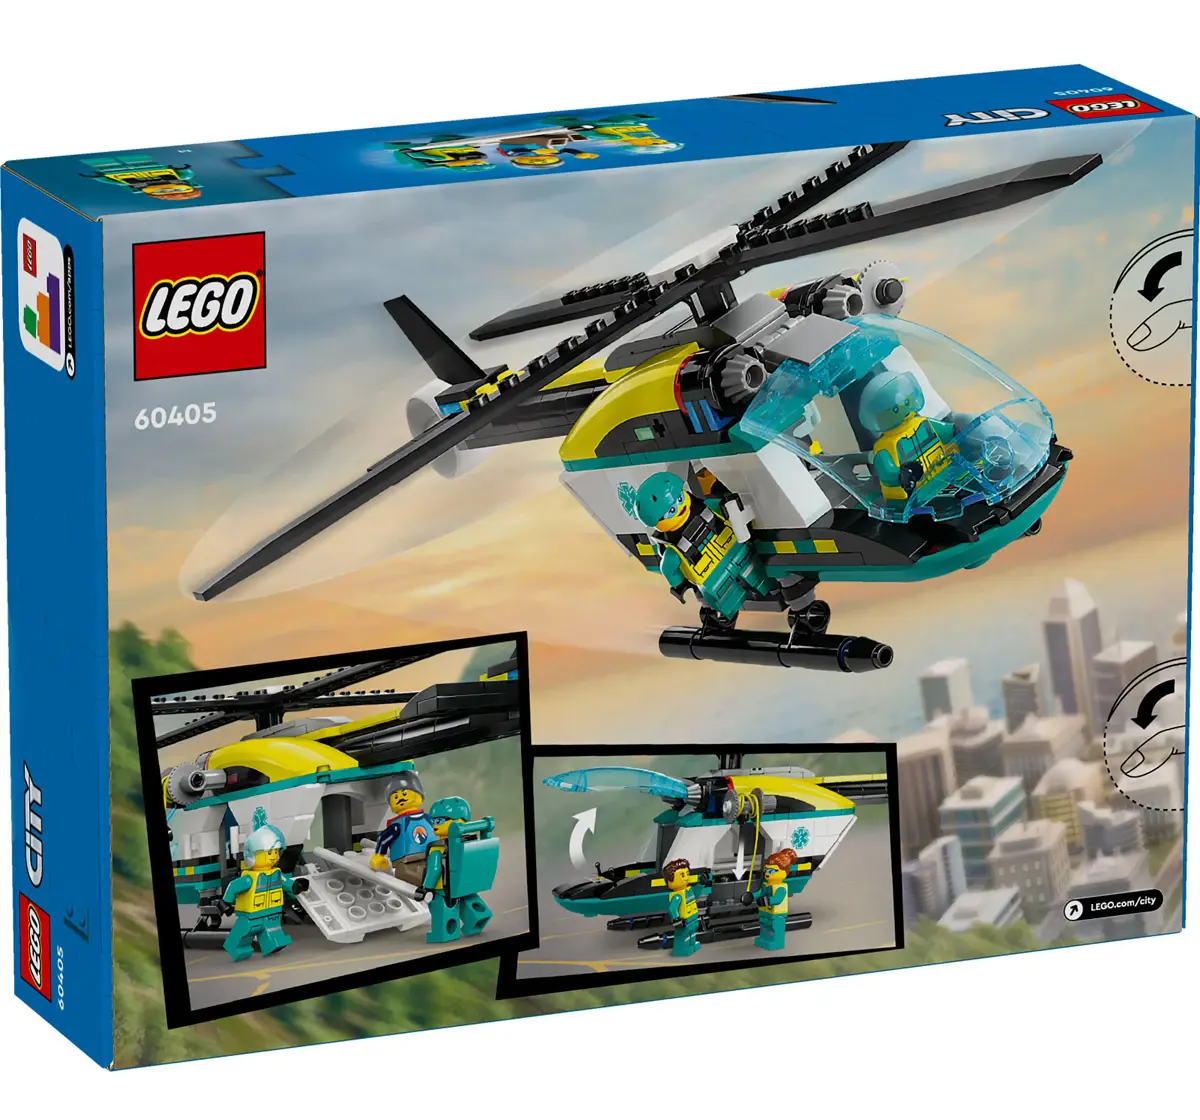 Lego City Emergency Rescue Helicopter Building Kit 60405 Multicolour For Kids Ages 6Y+ (226 Pieces)